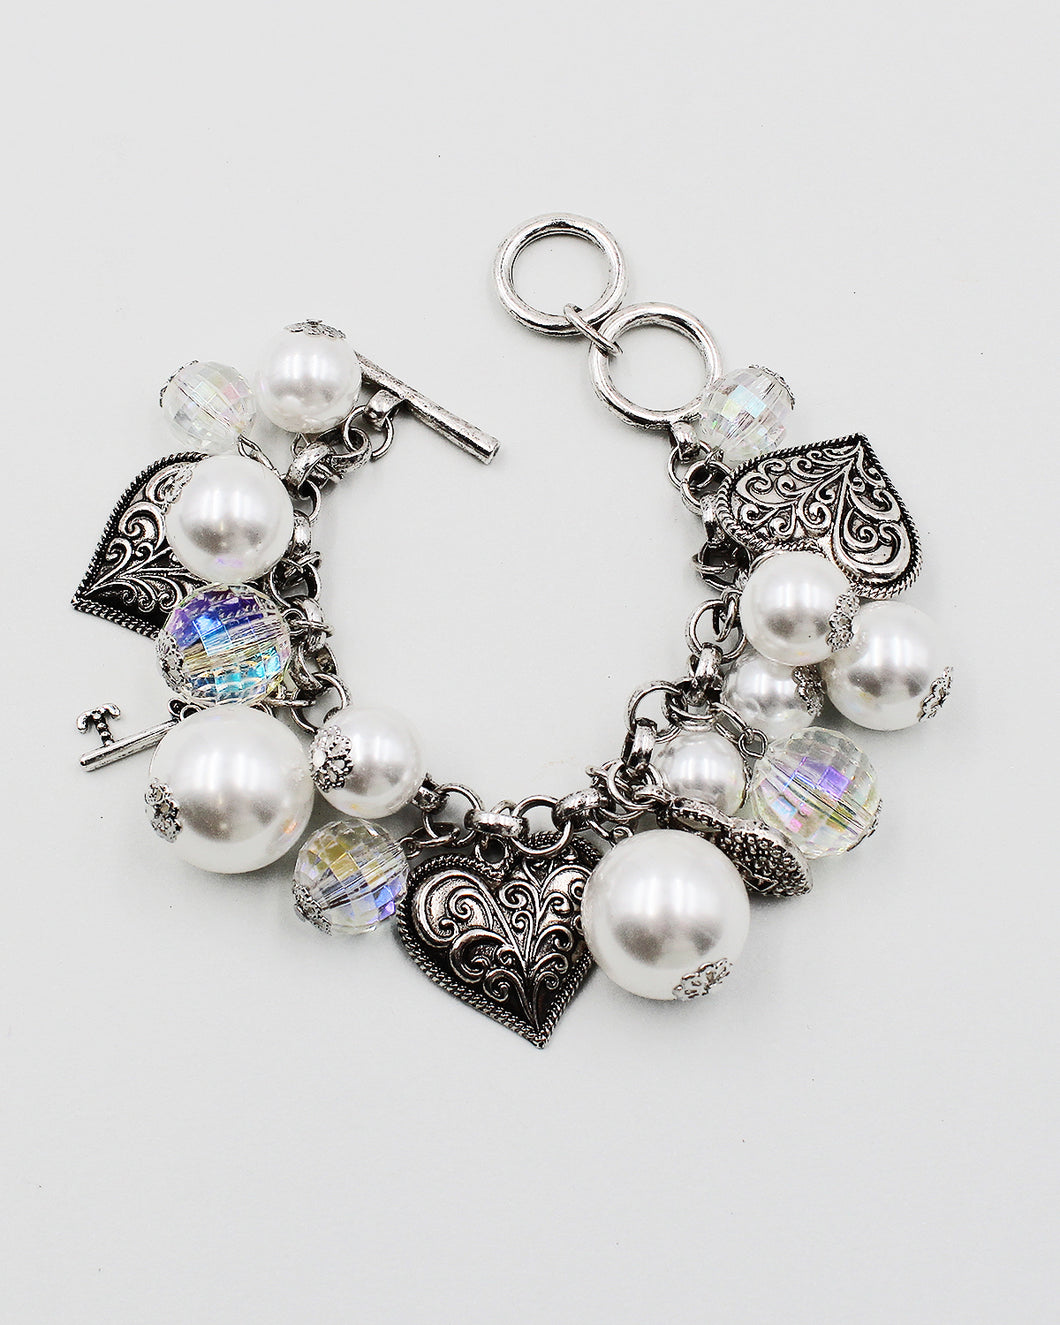 Heart Charm Bracelet with Pearl Beads